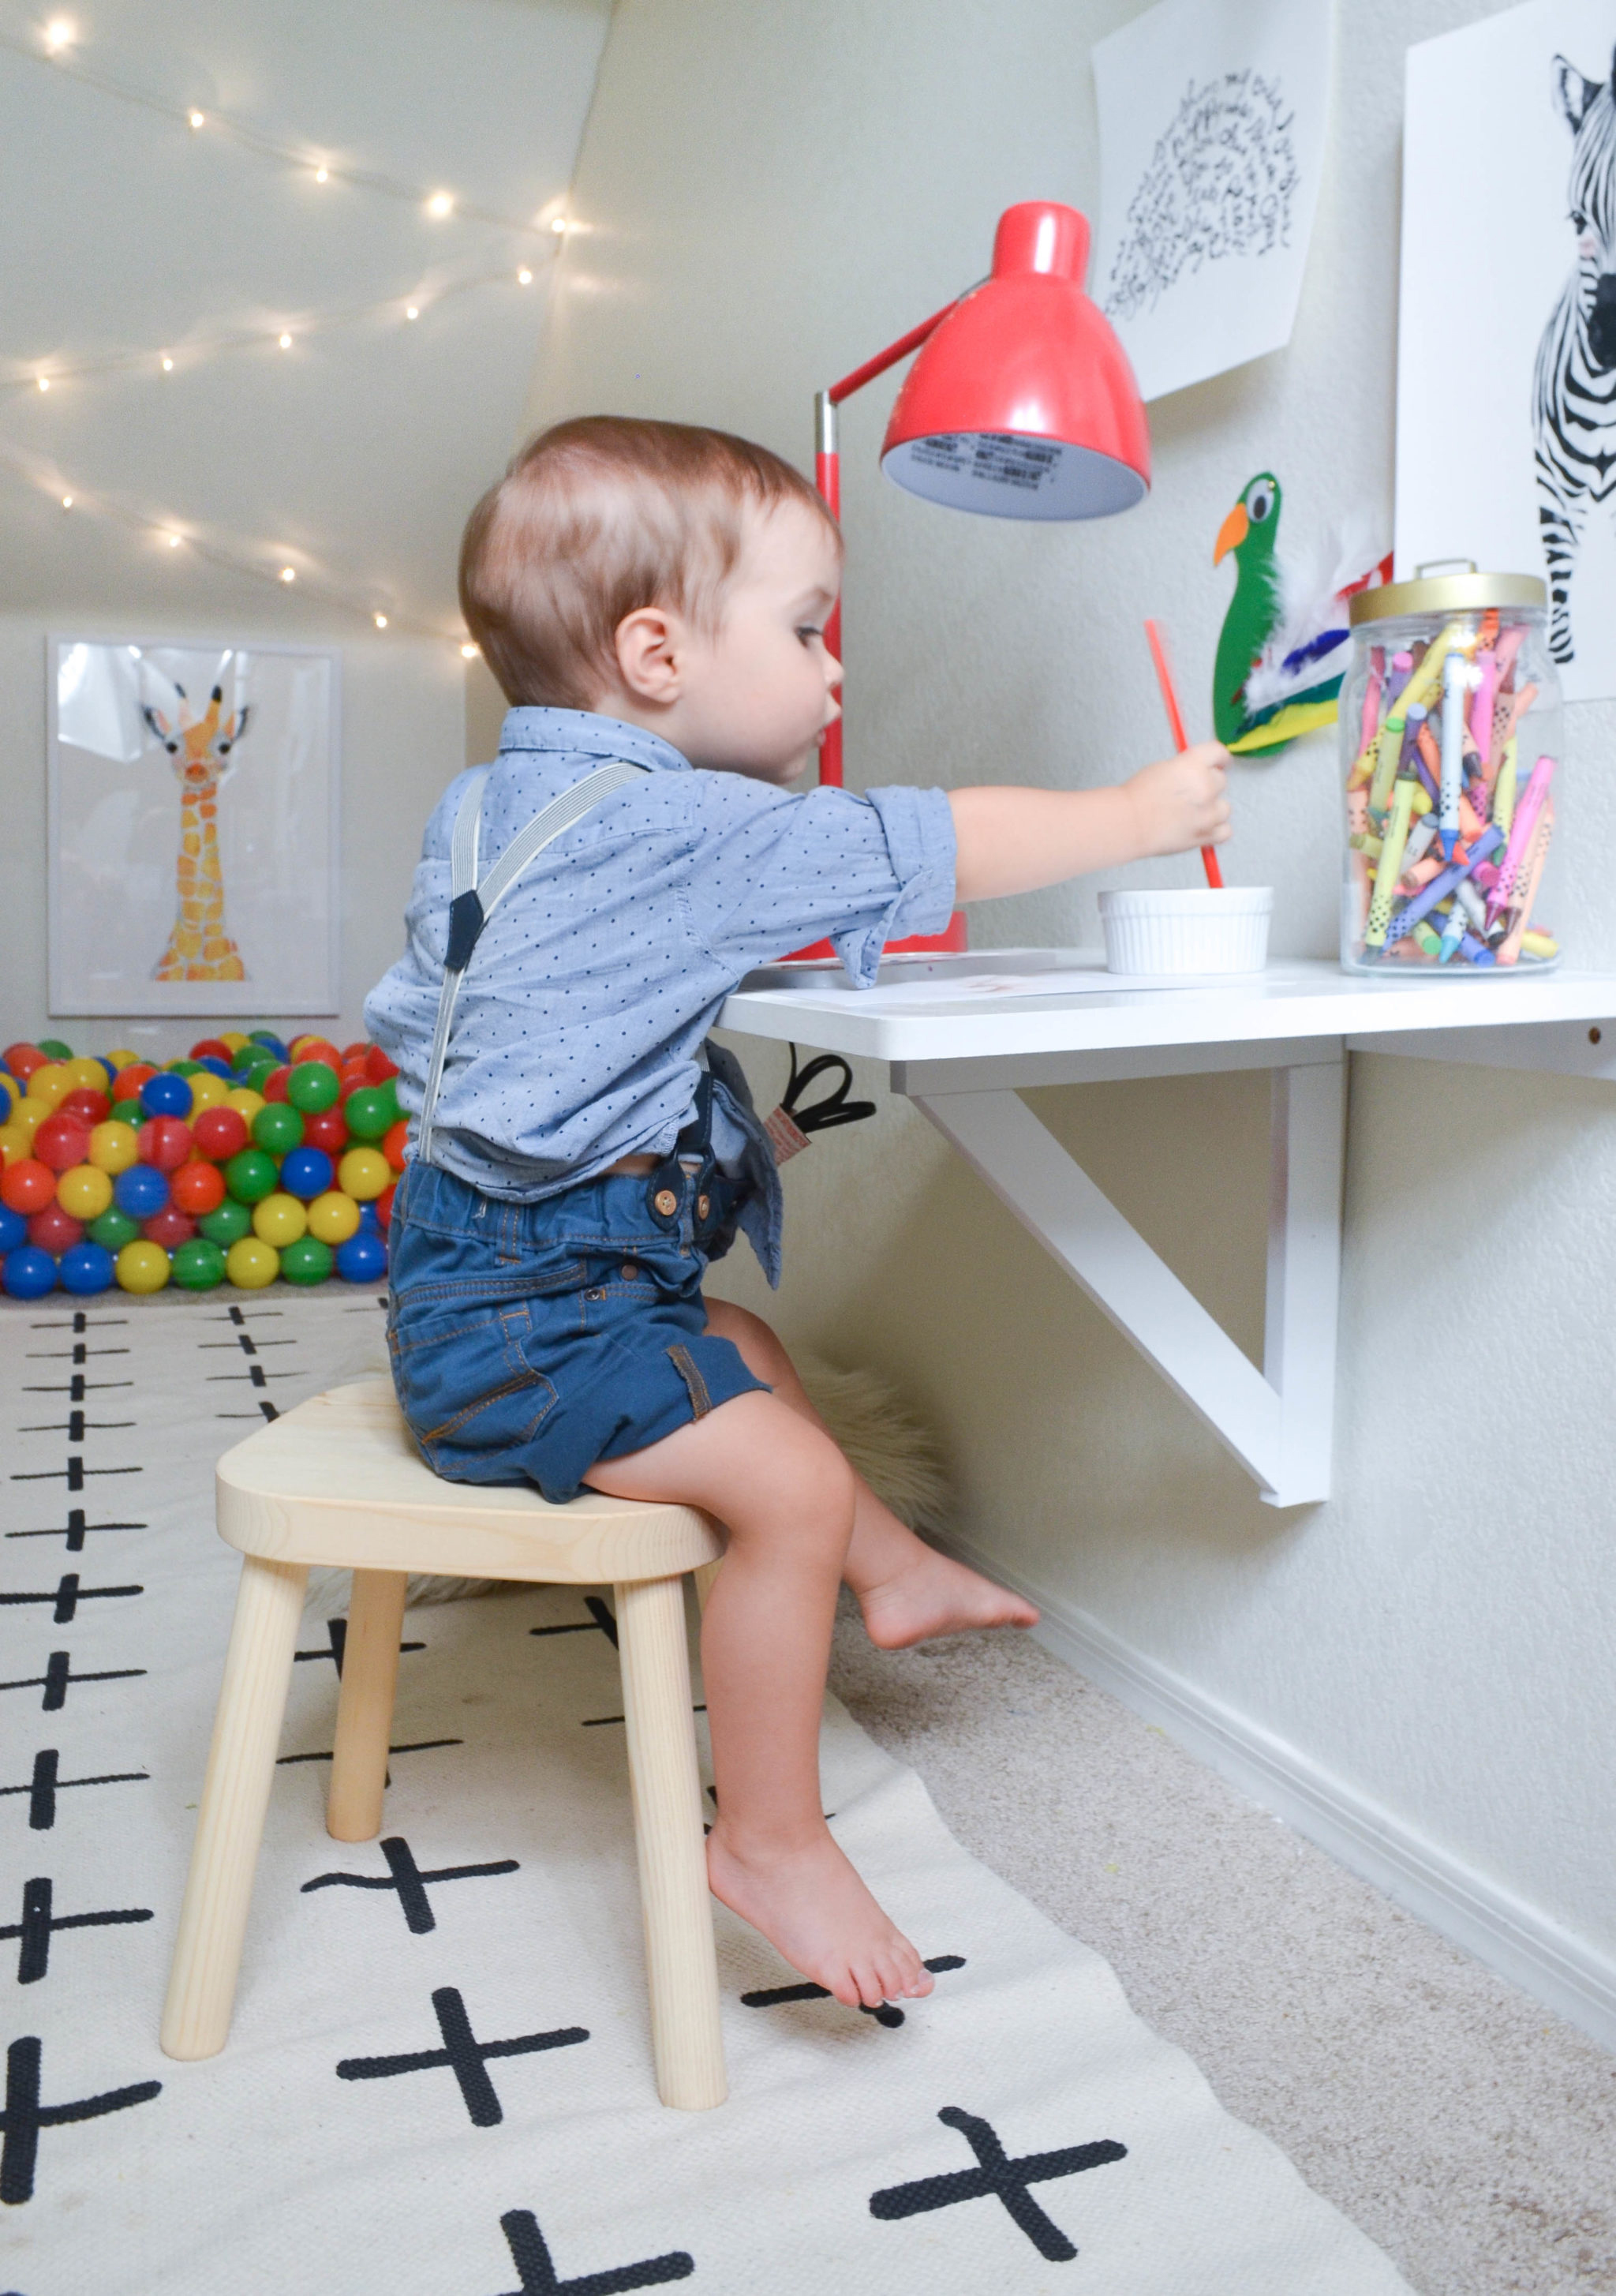 Turn Your Child’s Closet into a Magical Play Space